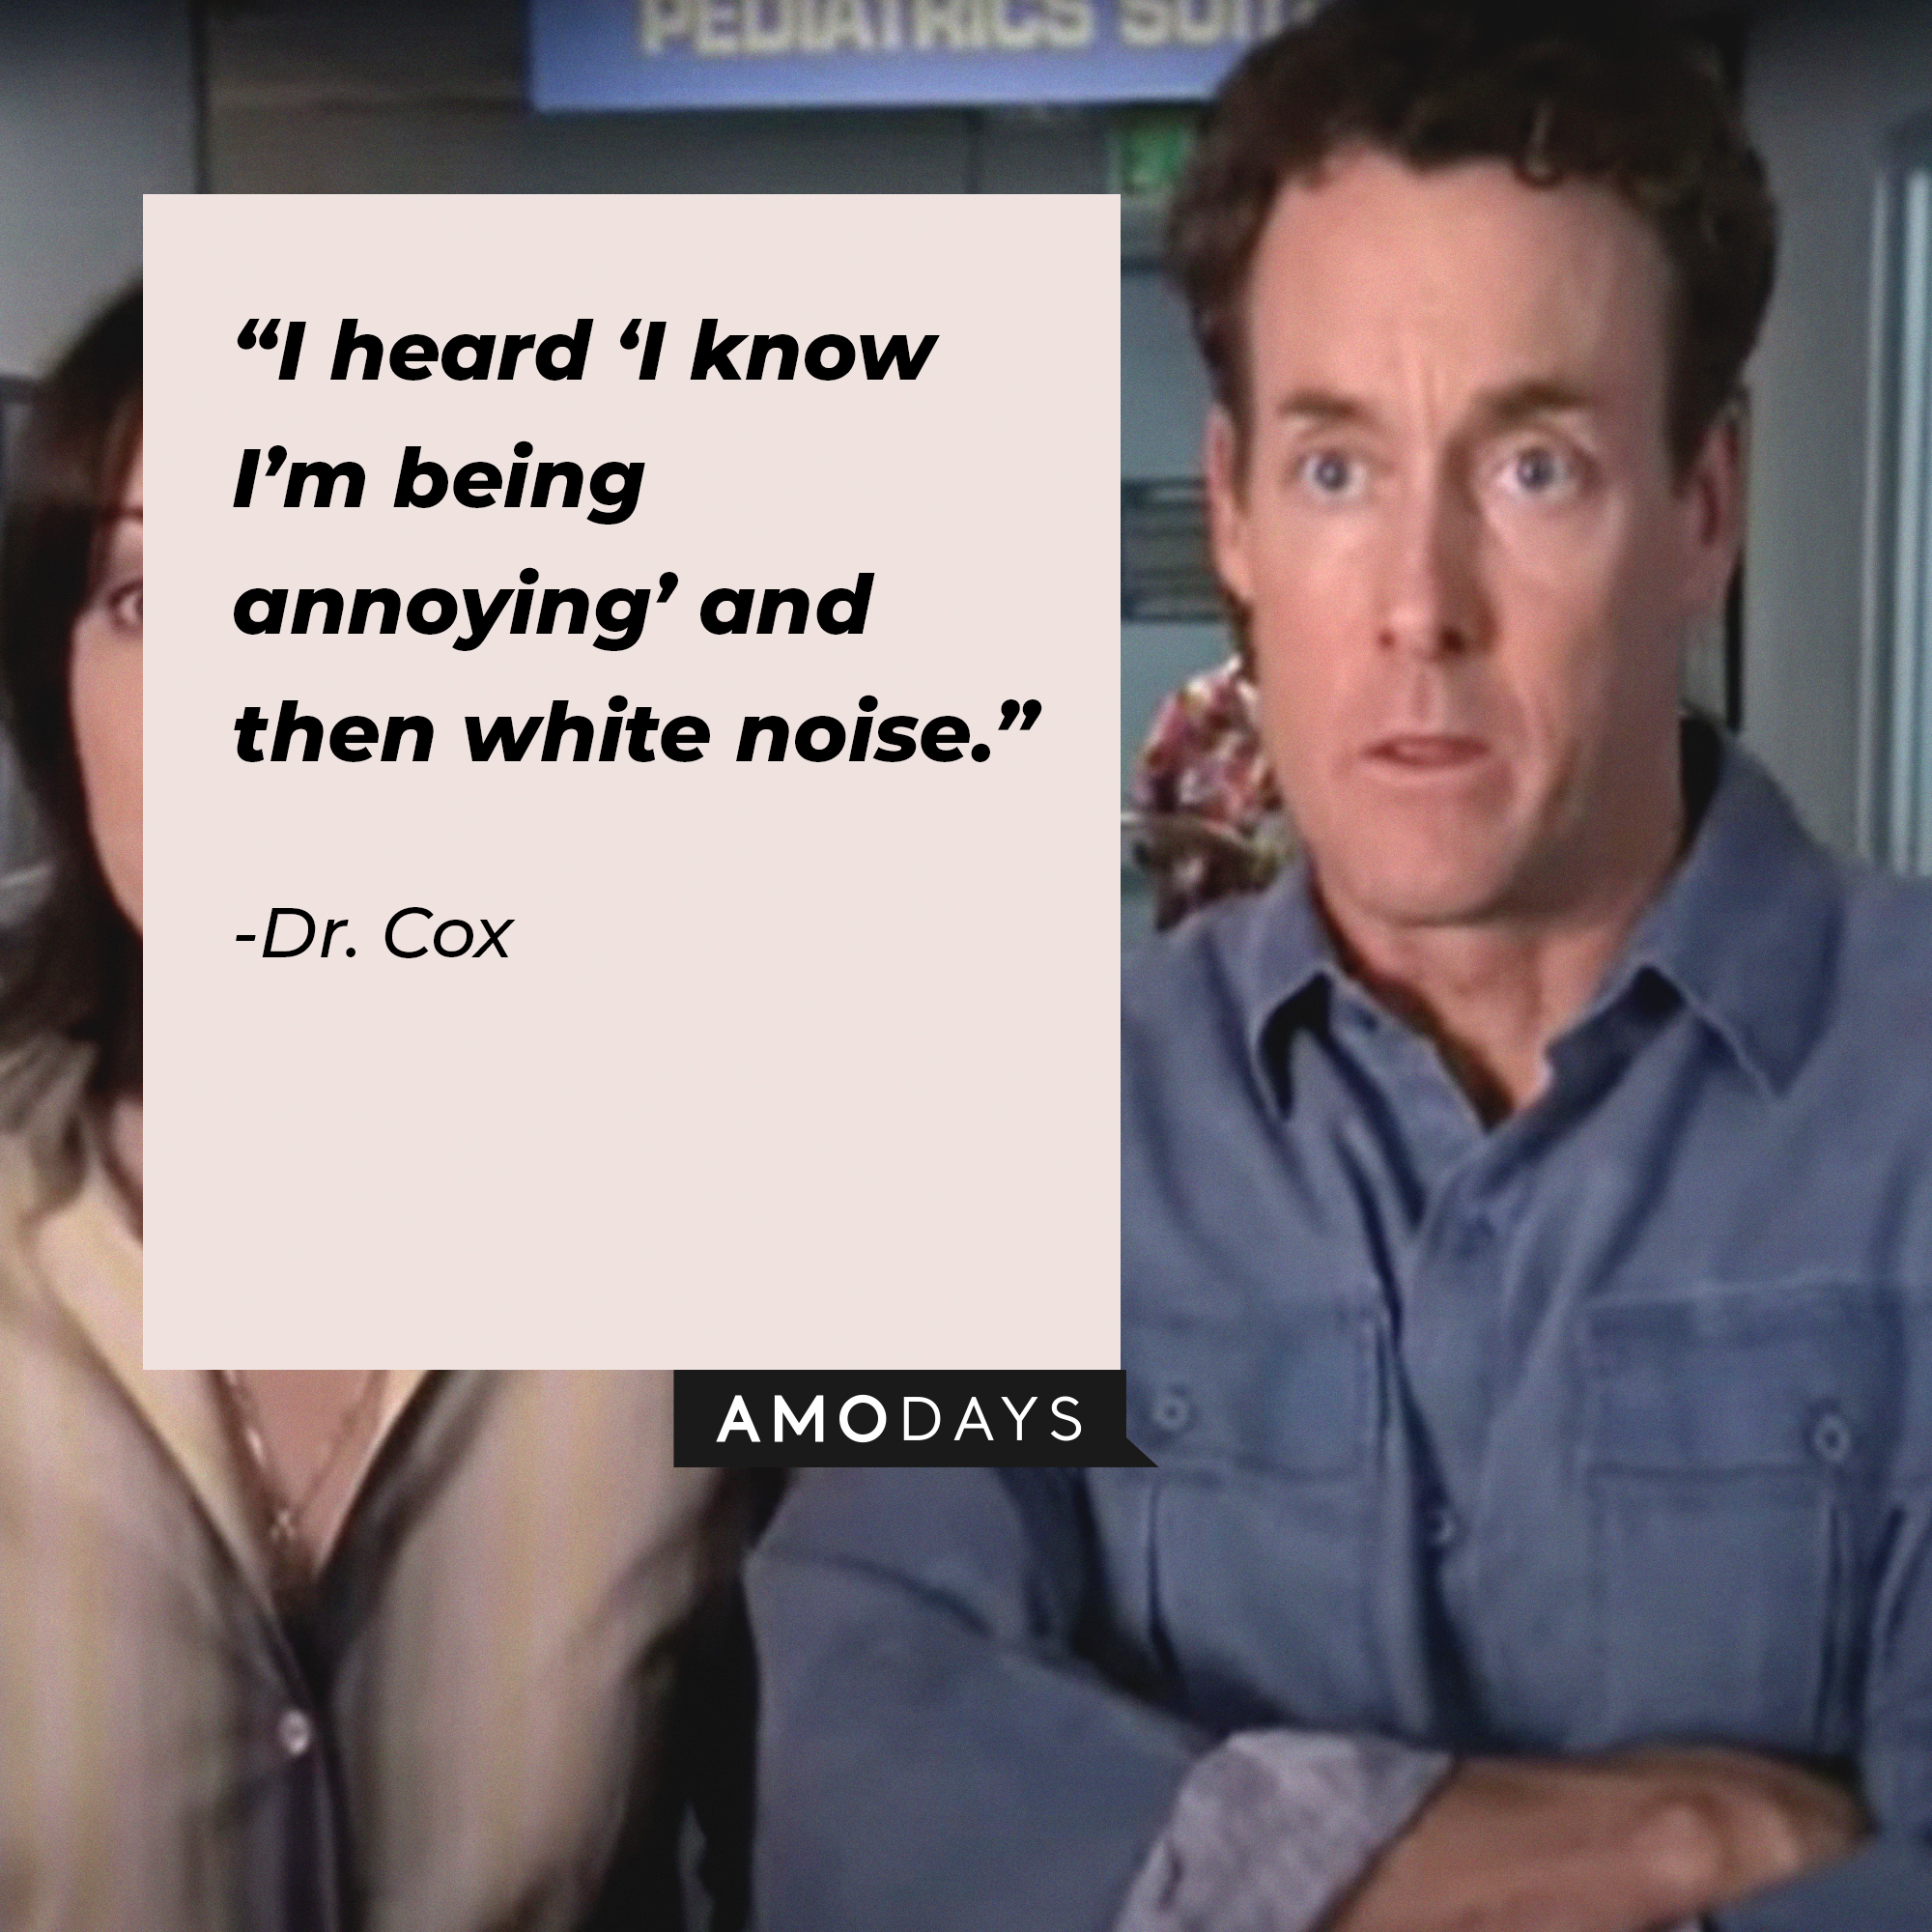 Dr. Cox, with his quote: “I heard ‘I know I’m being annoying’ and then white noise.” | Source: facebook.com/scrubs